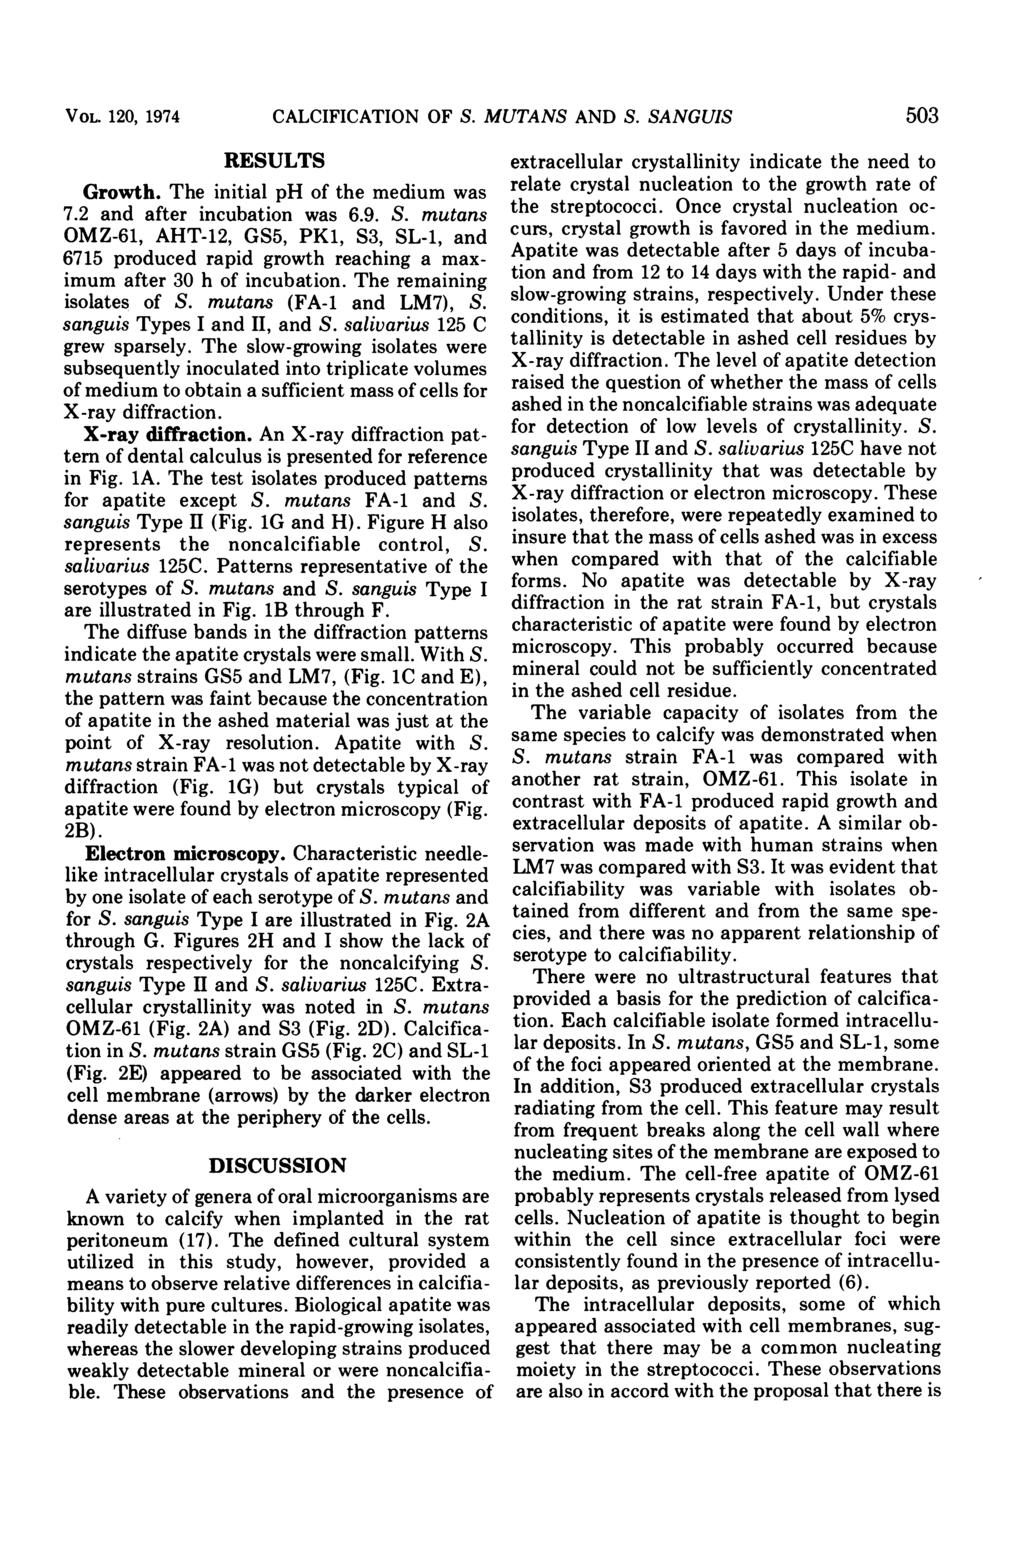 VOL. 120, 1974 CALCFCATON OF S. MUTANS AND S. SANGUS 503 RESULTS Growth. The ntal ph of the medum was 7.2 and after ncubaton was 6.9. S. mutans OMZ-61, AHT-12, GS5, PK1, S3, SL-1, and 6715 produced rapd growth reachng a maxmum after 30 h of ncubaton.